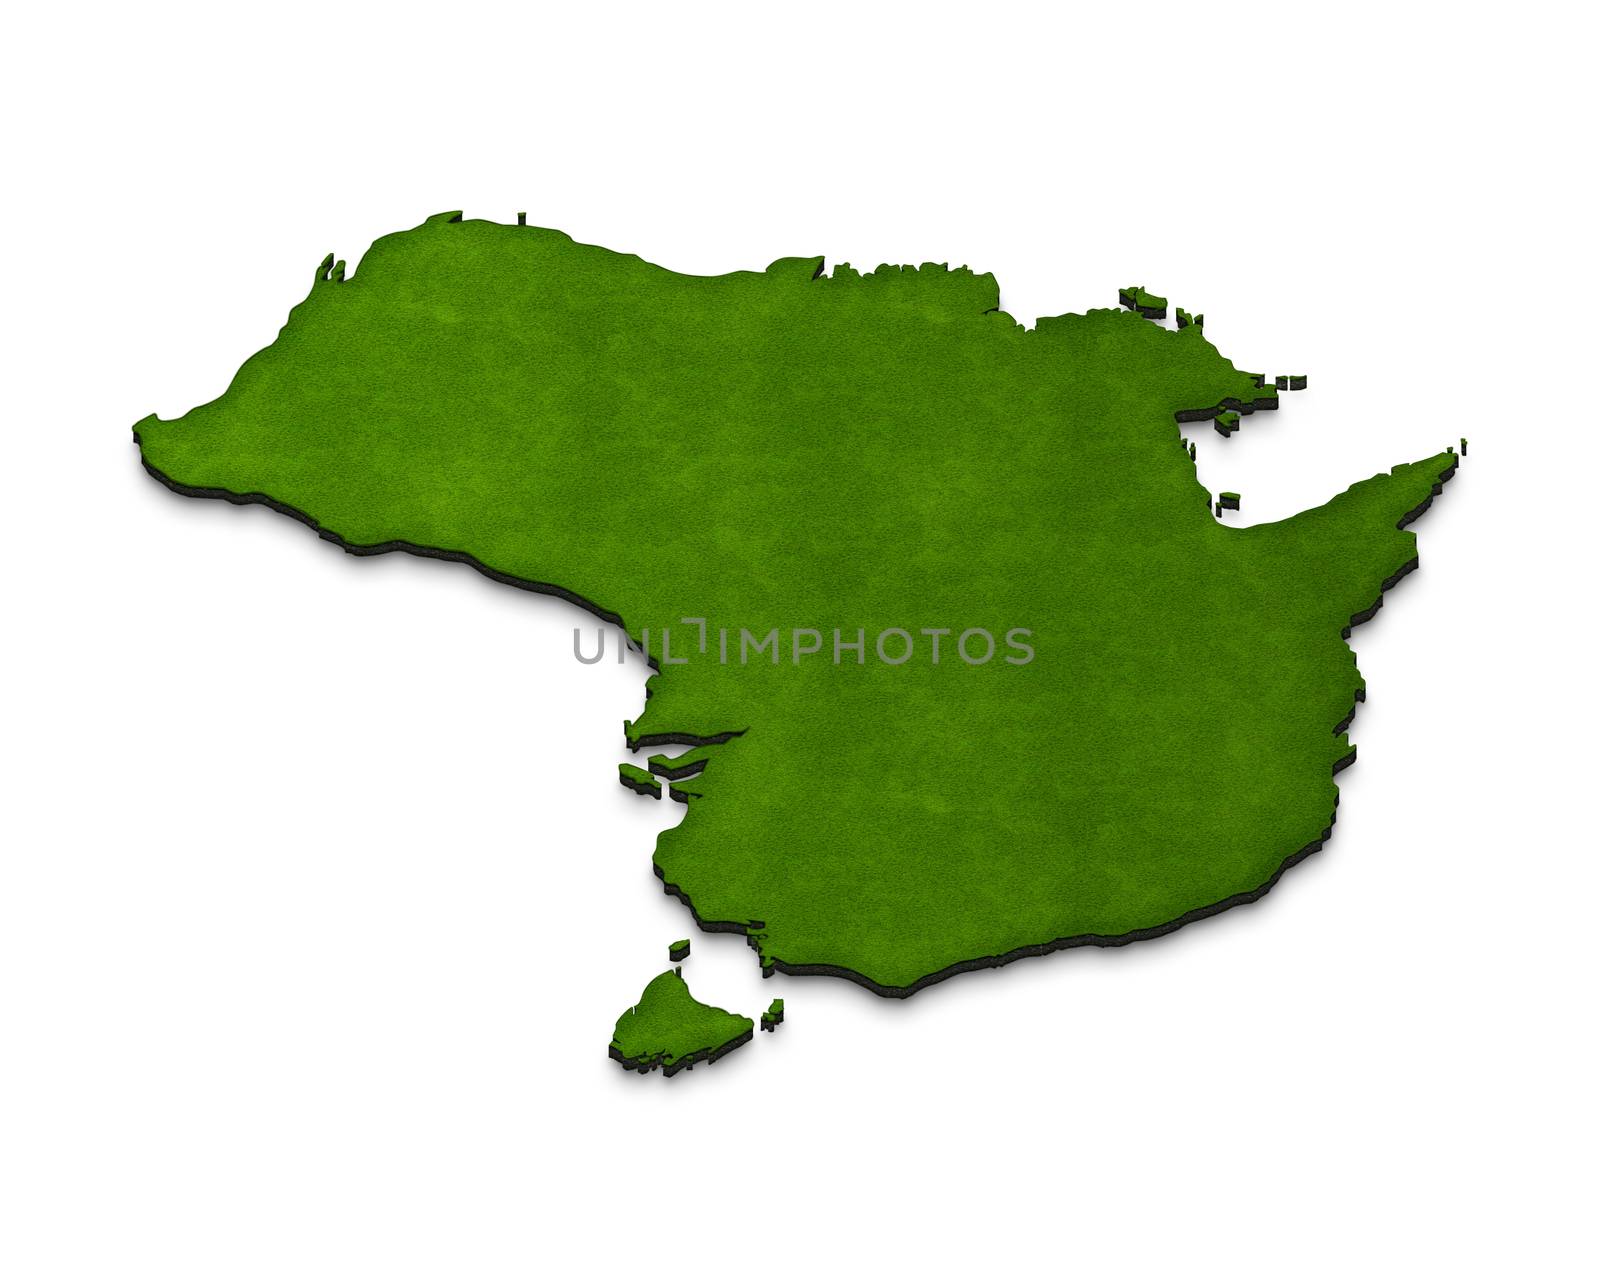 Illustration of a green ground map of Australia on isolated background. Left 3D isometric projection.